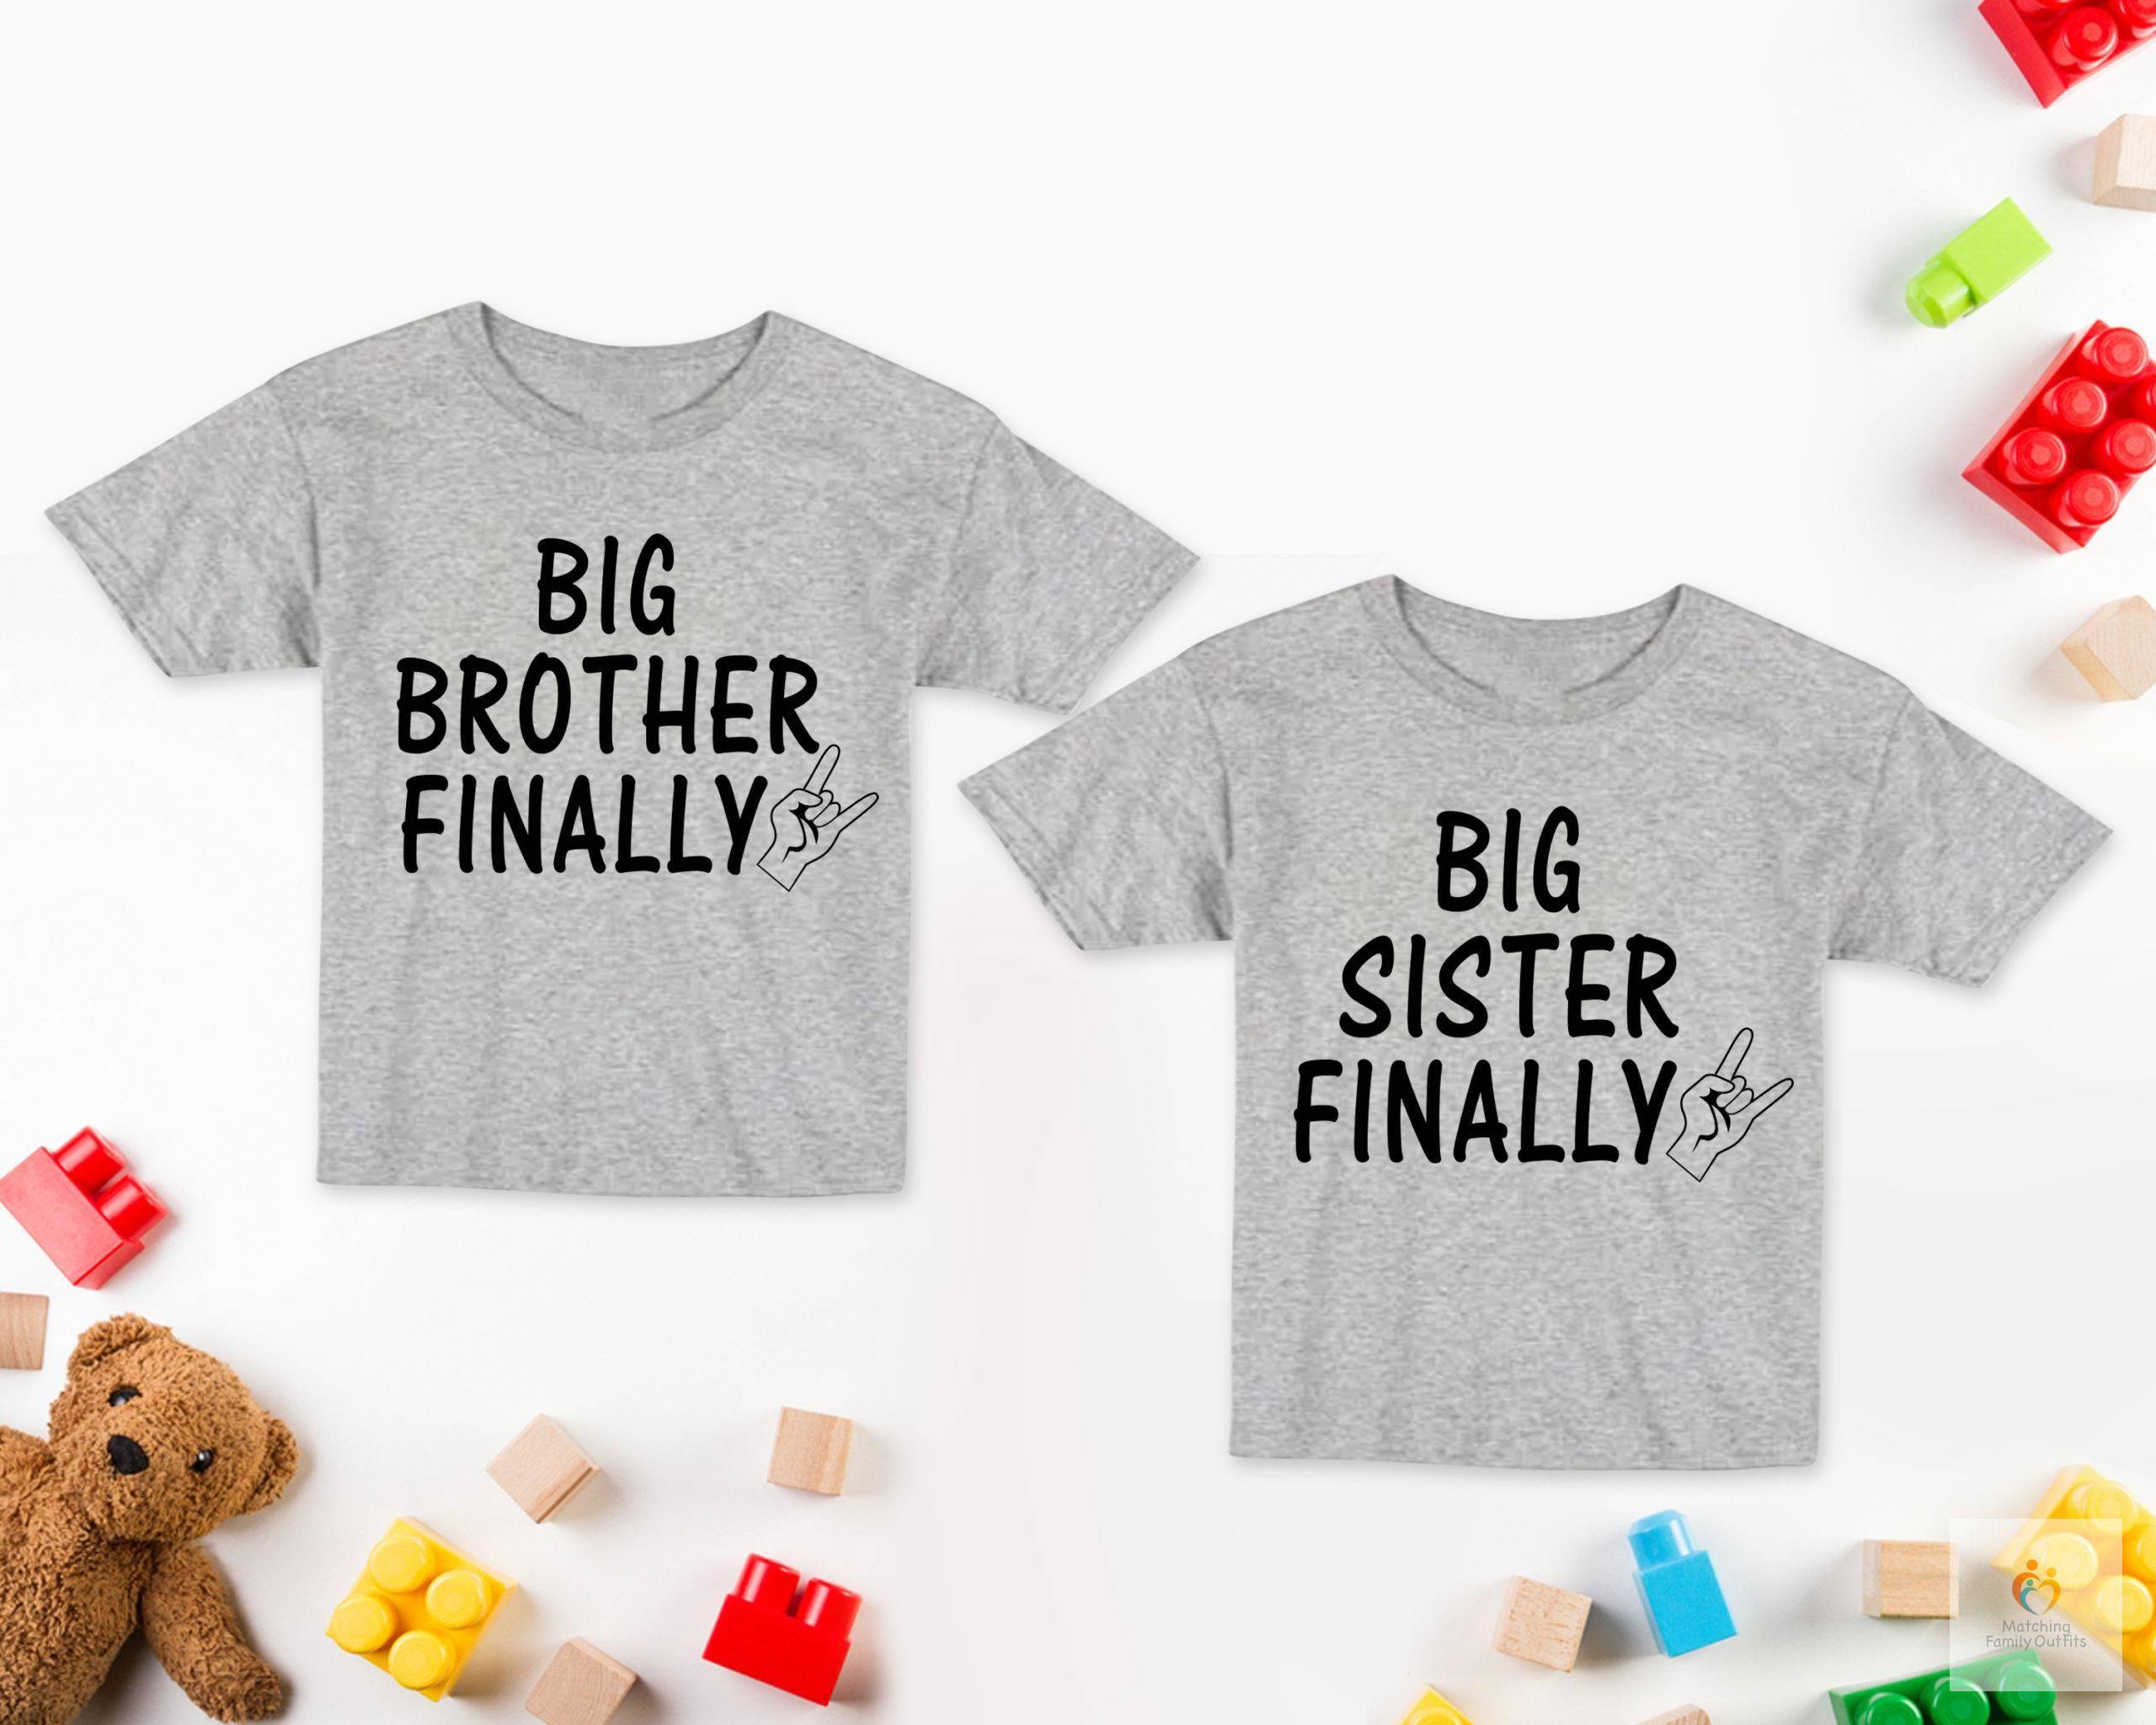 Big Brother 8211 Big Sister Finally Kids T shirts Pregnancy Announcement T shirts and Baby Shower Gifts Siblings Matchin 4